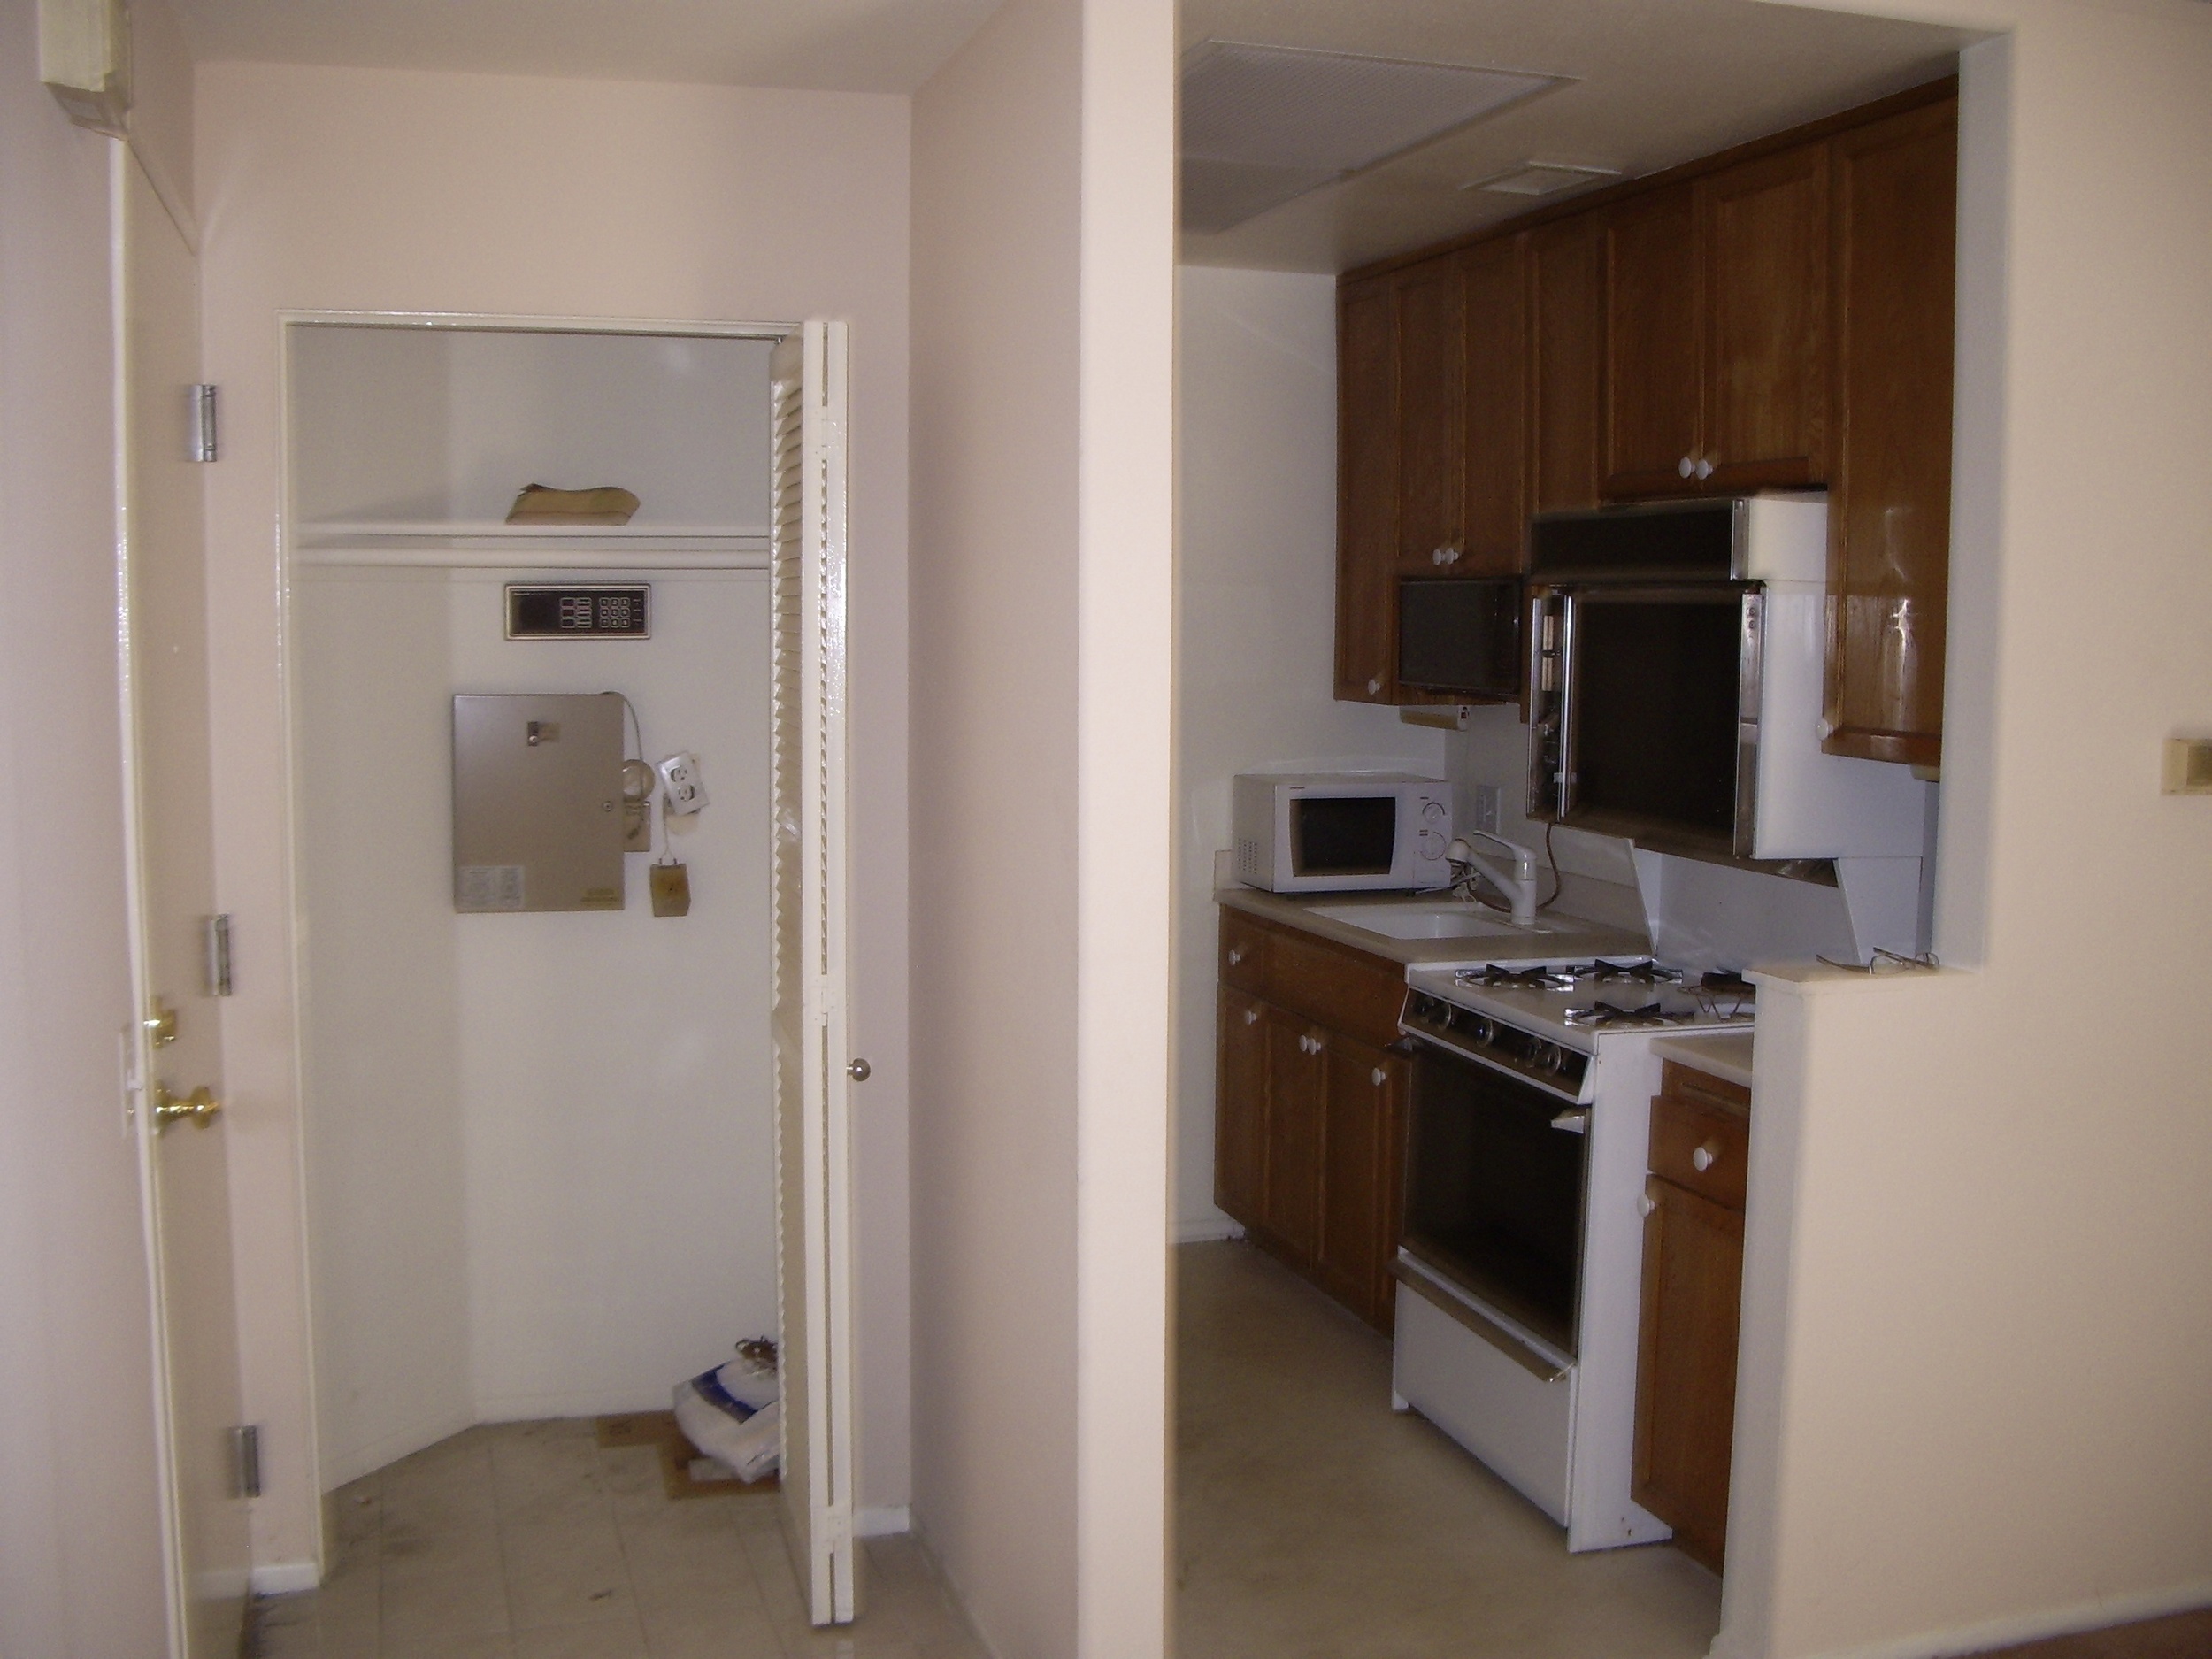  Before: Entry and kitchen 